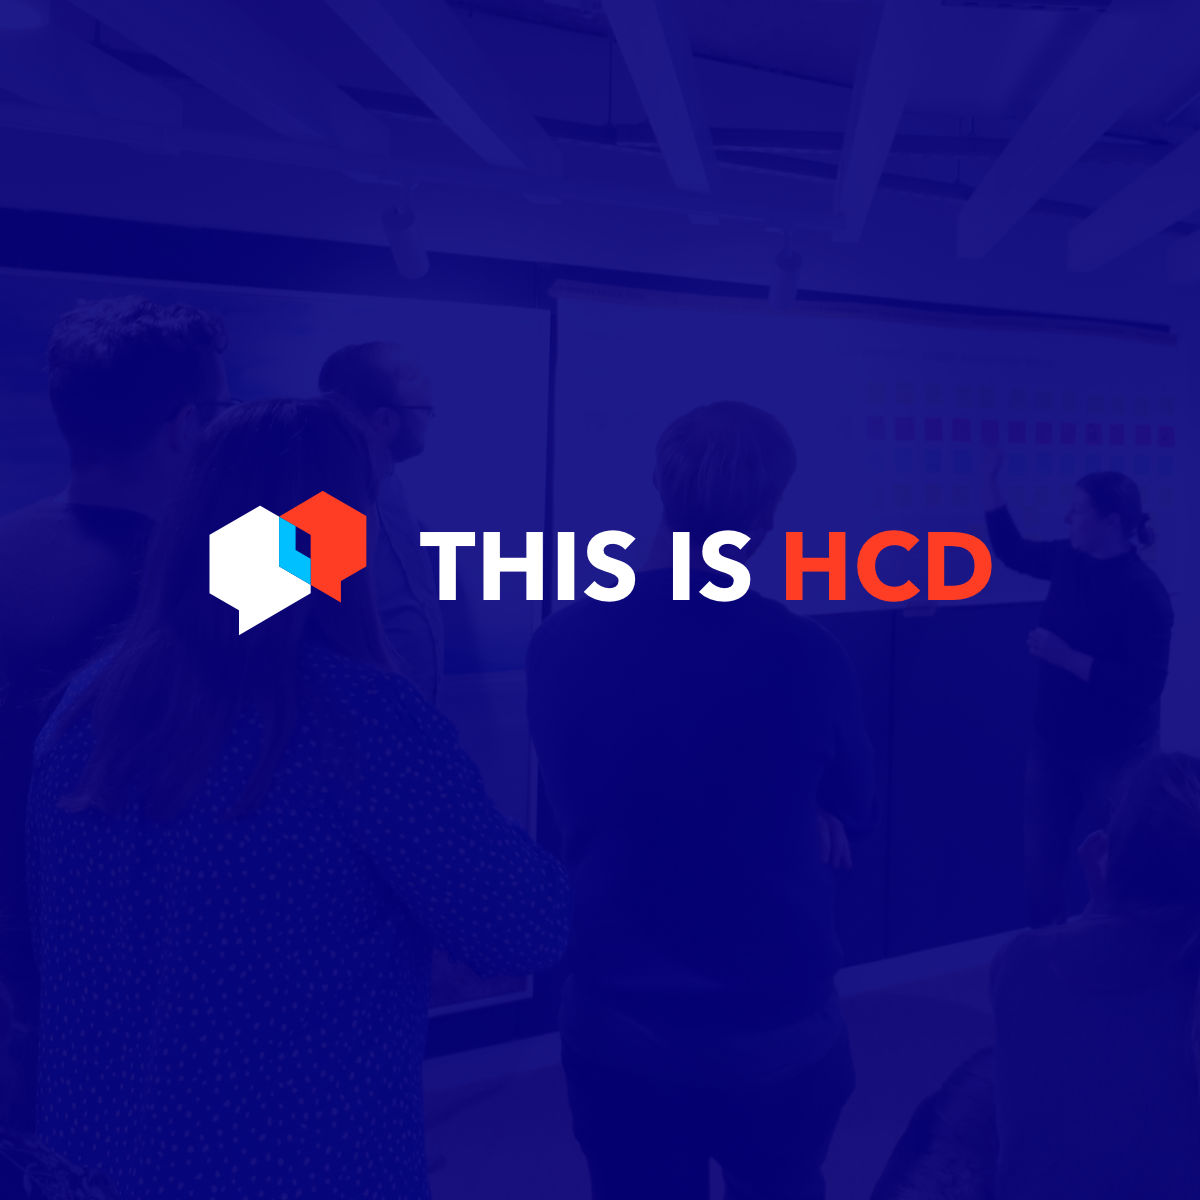 This is HCD (This is HCD)